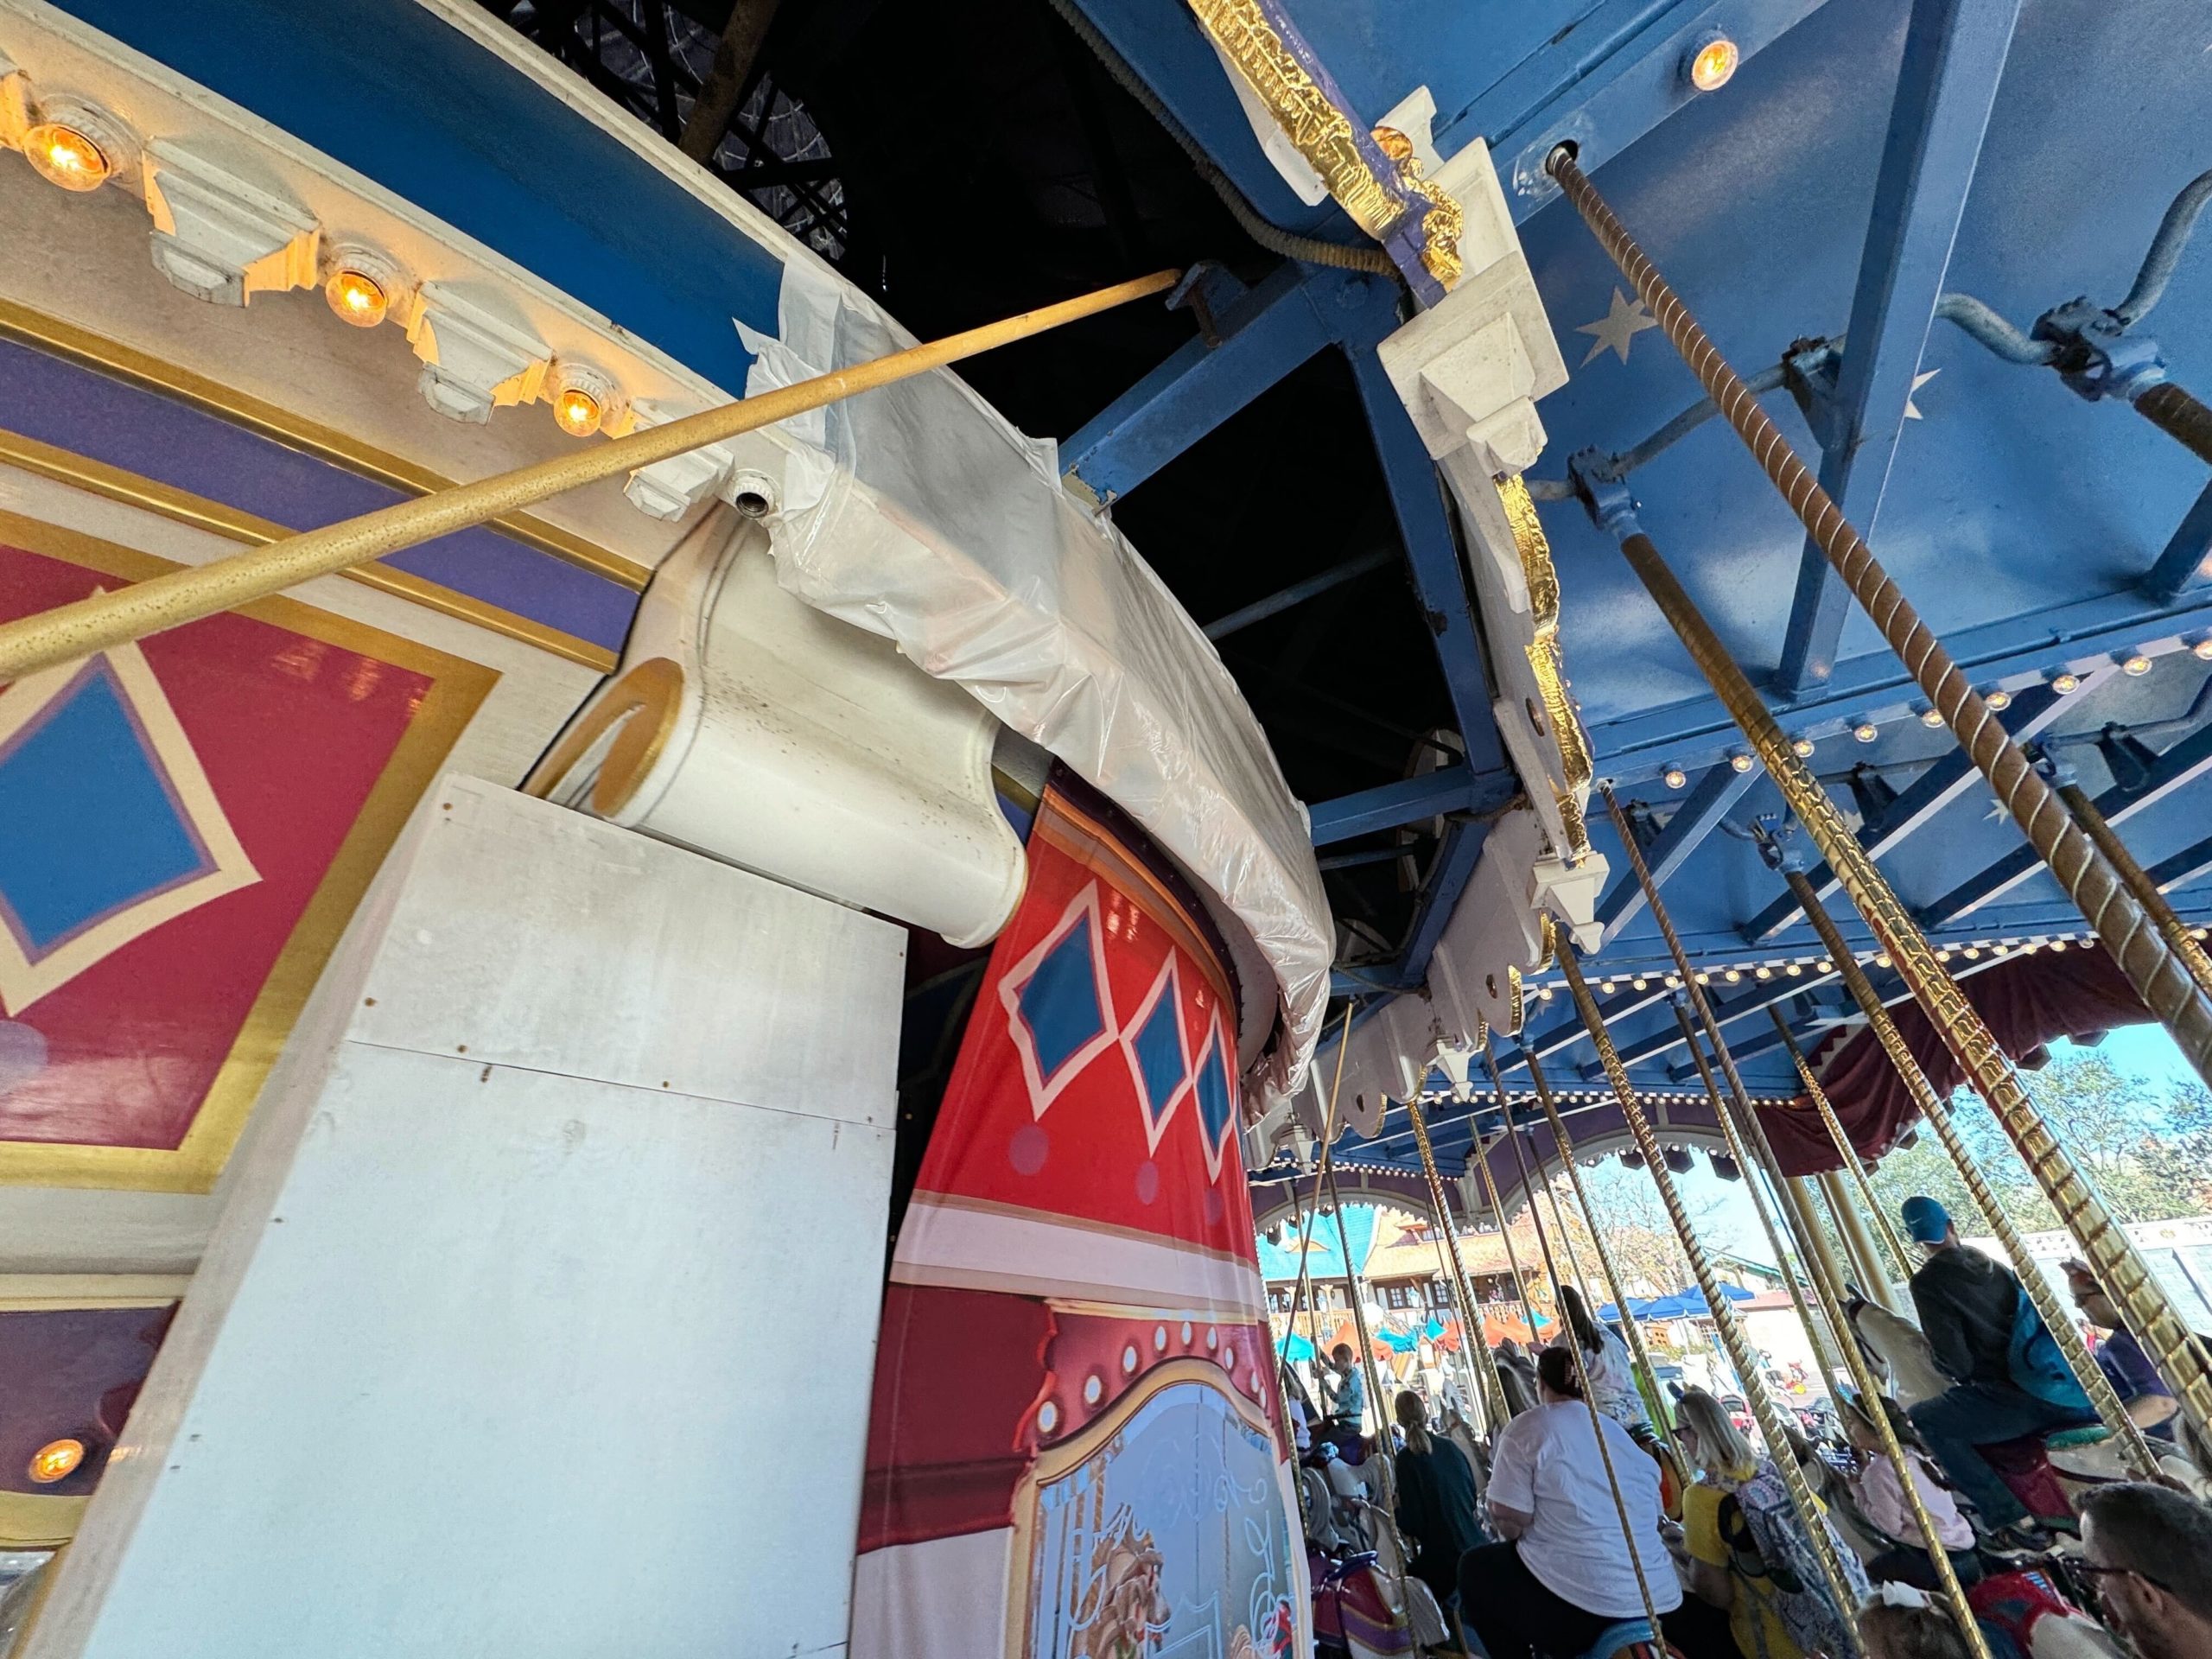 Construction Prince Charming's Regal carousel